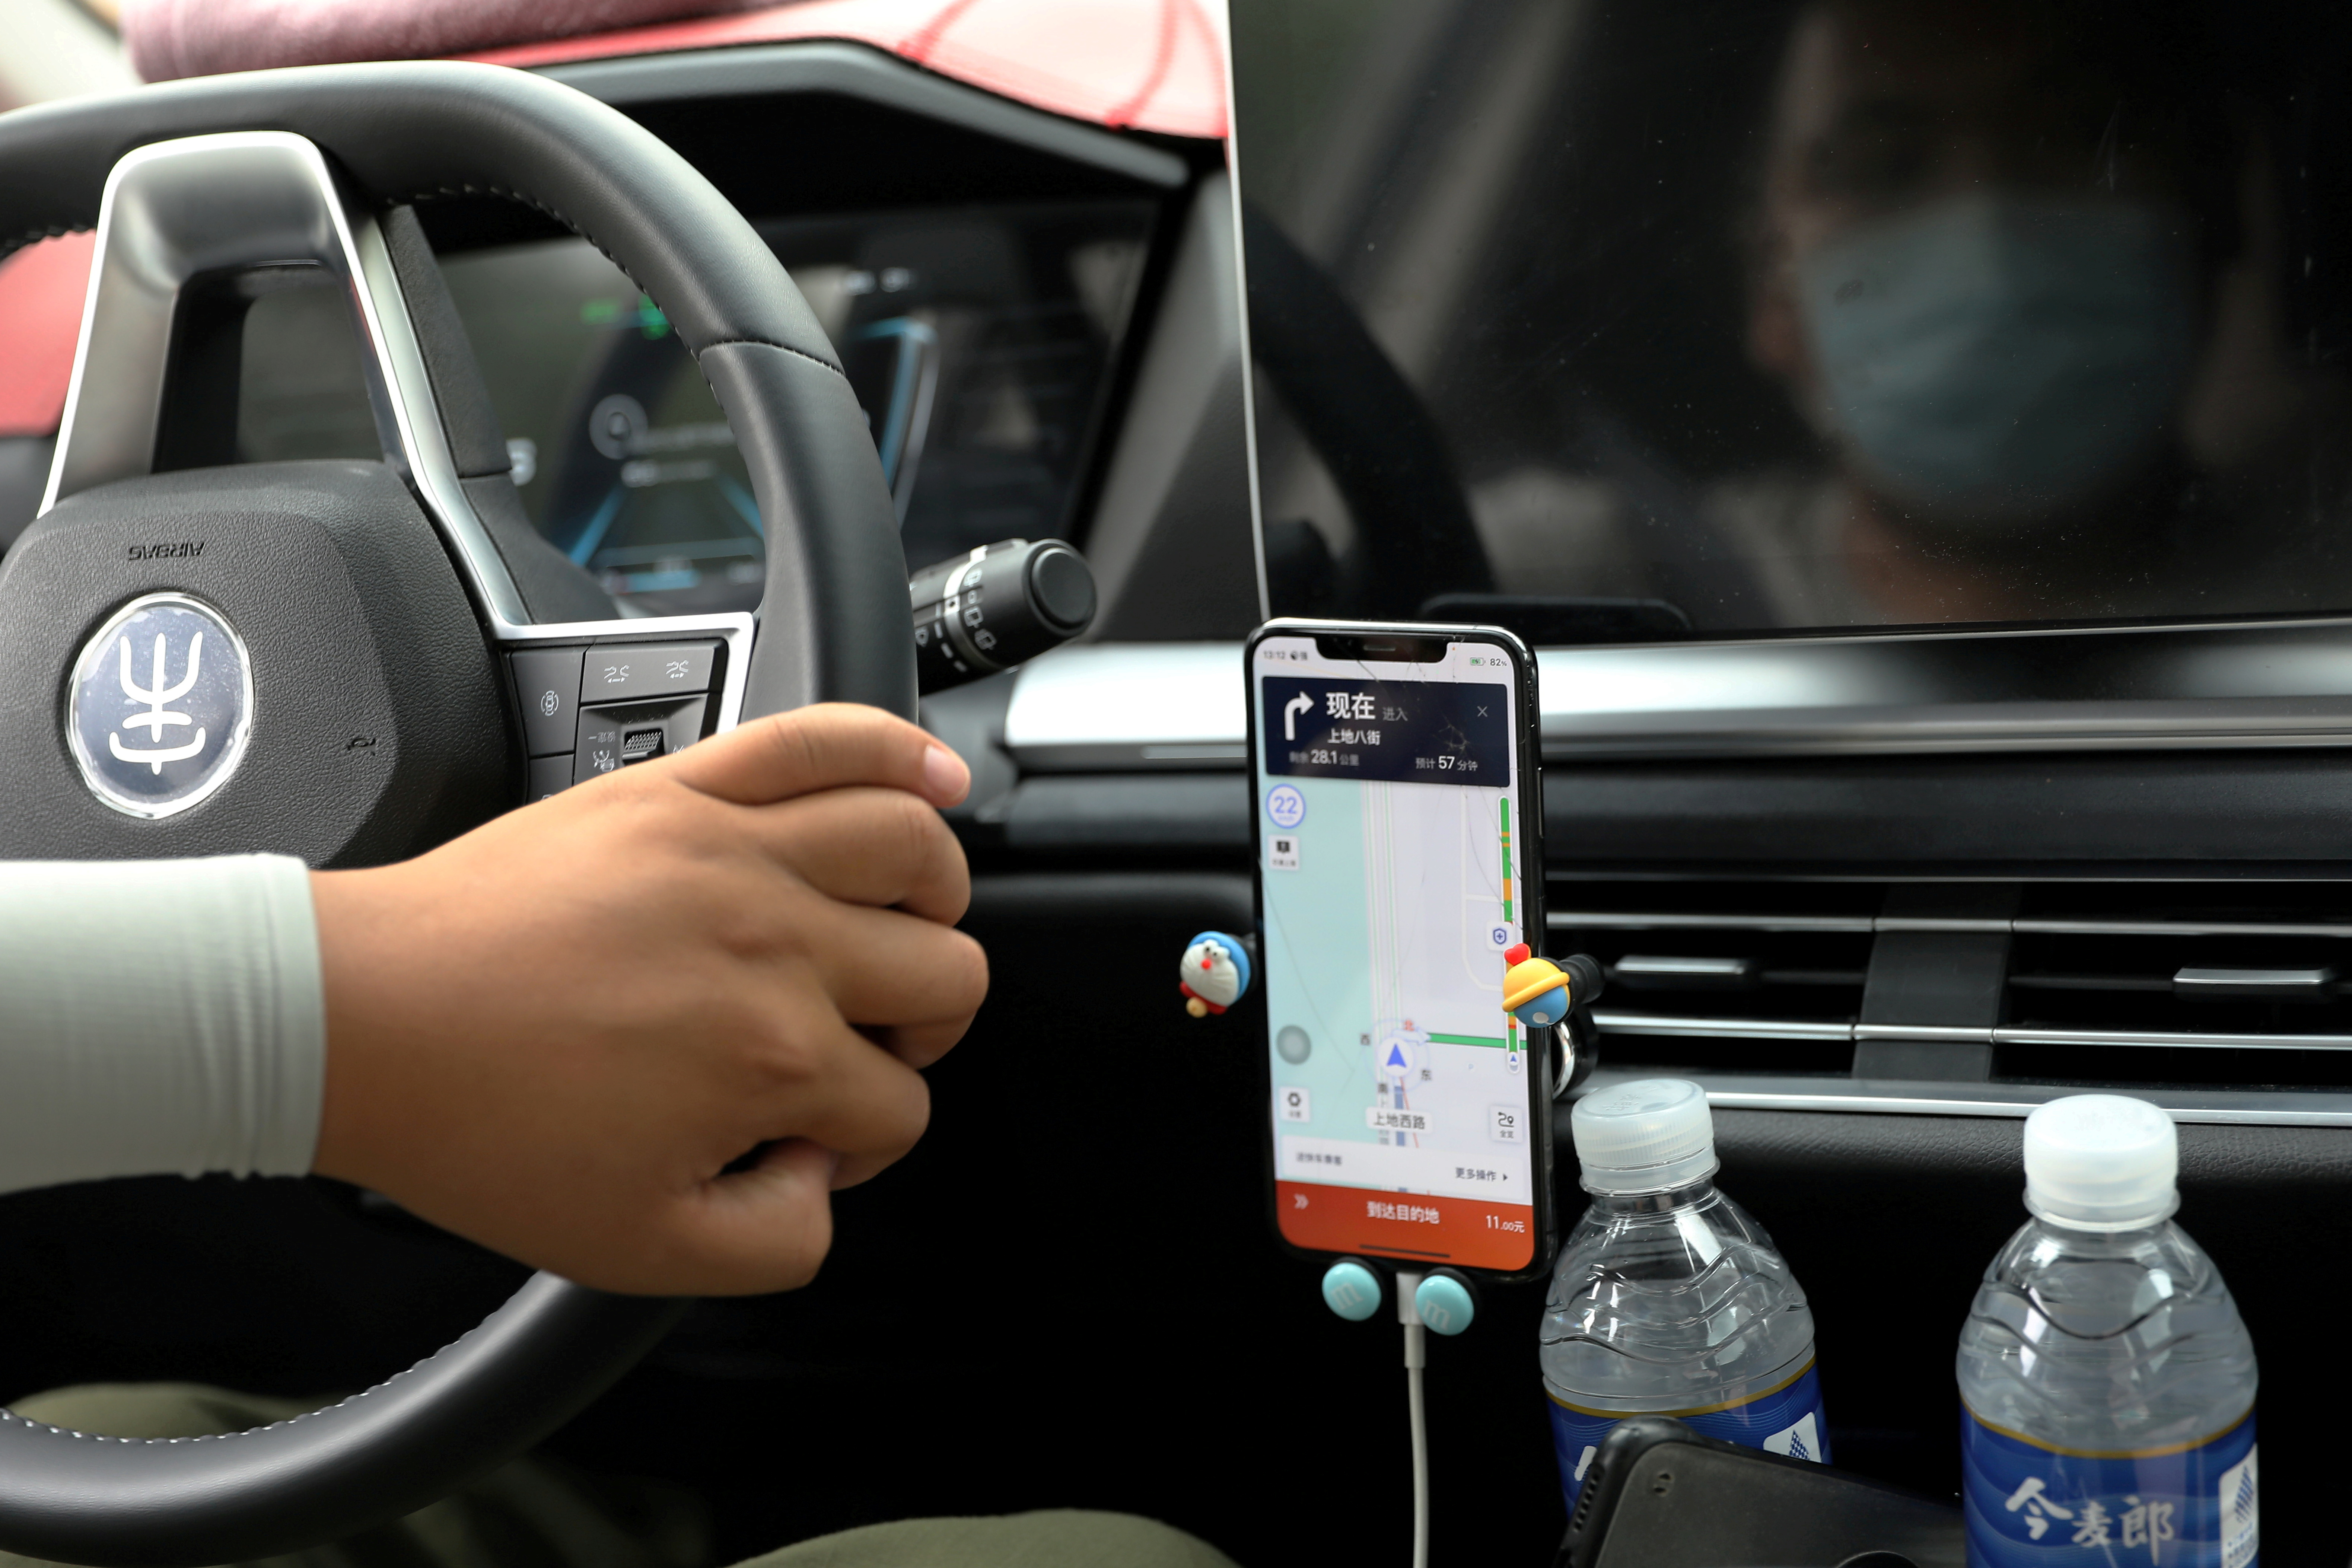 FILE PHOTO: Driver of Chinese ride-hailing service Didi drives with a phone showing a navigation map on Didi's app, in Beijing